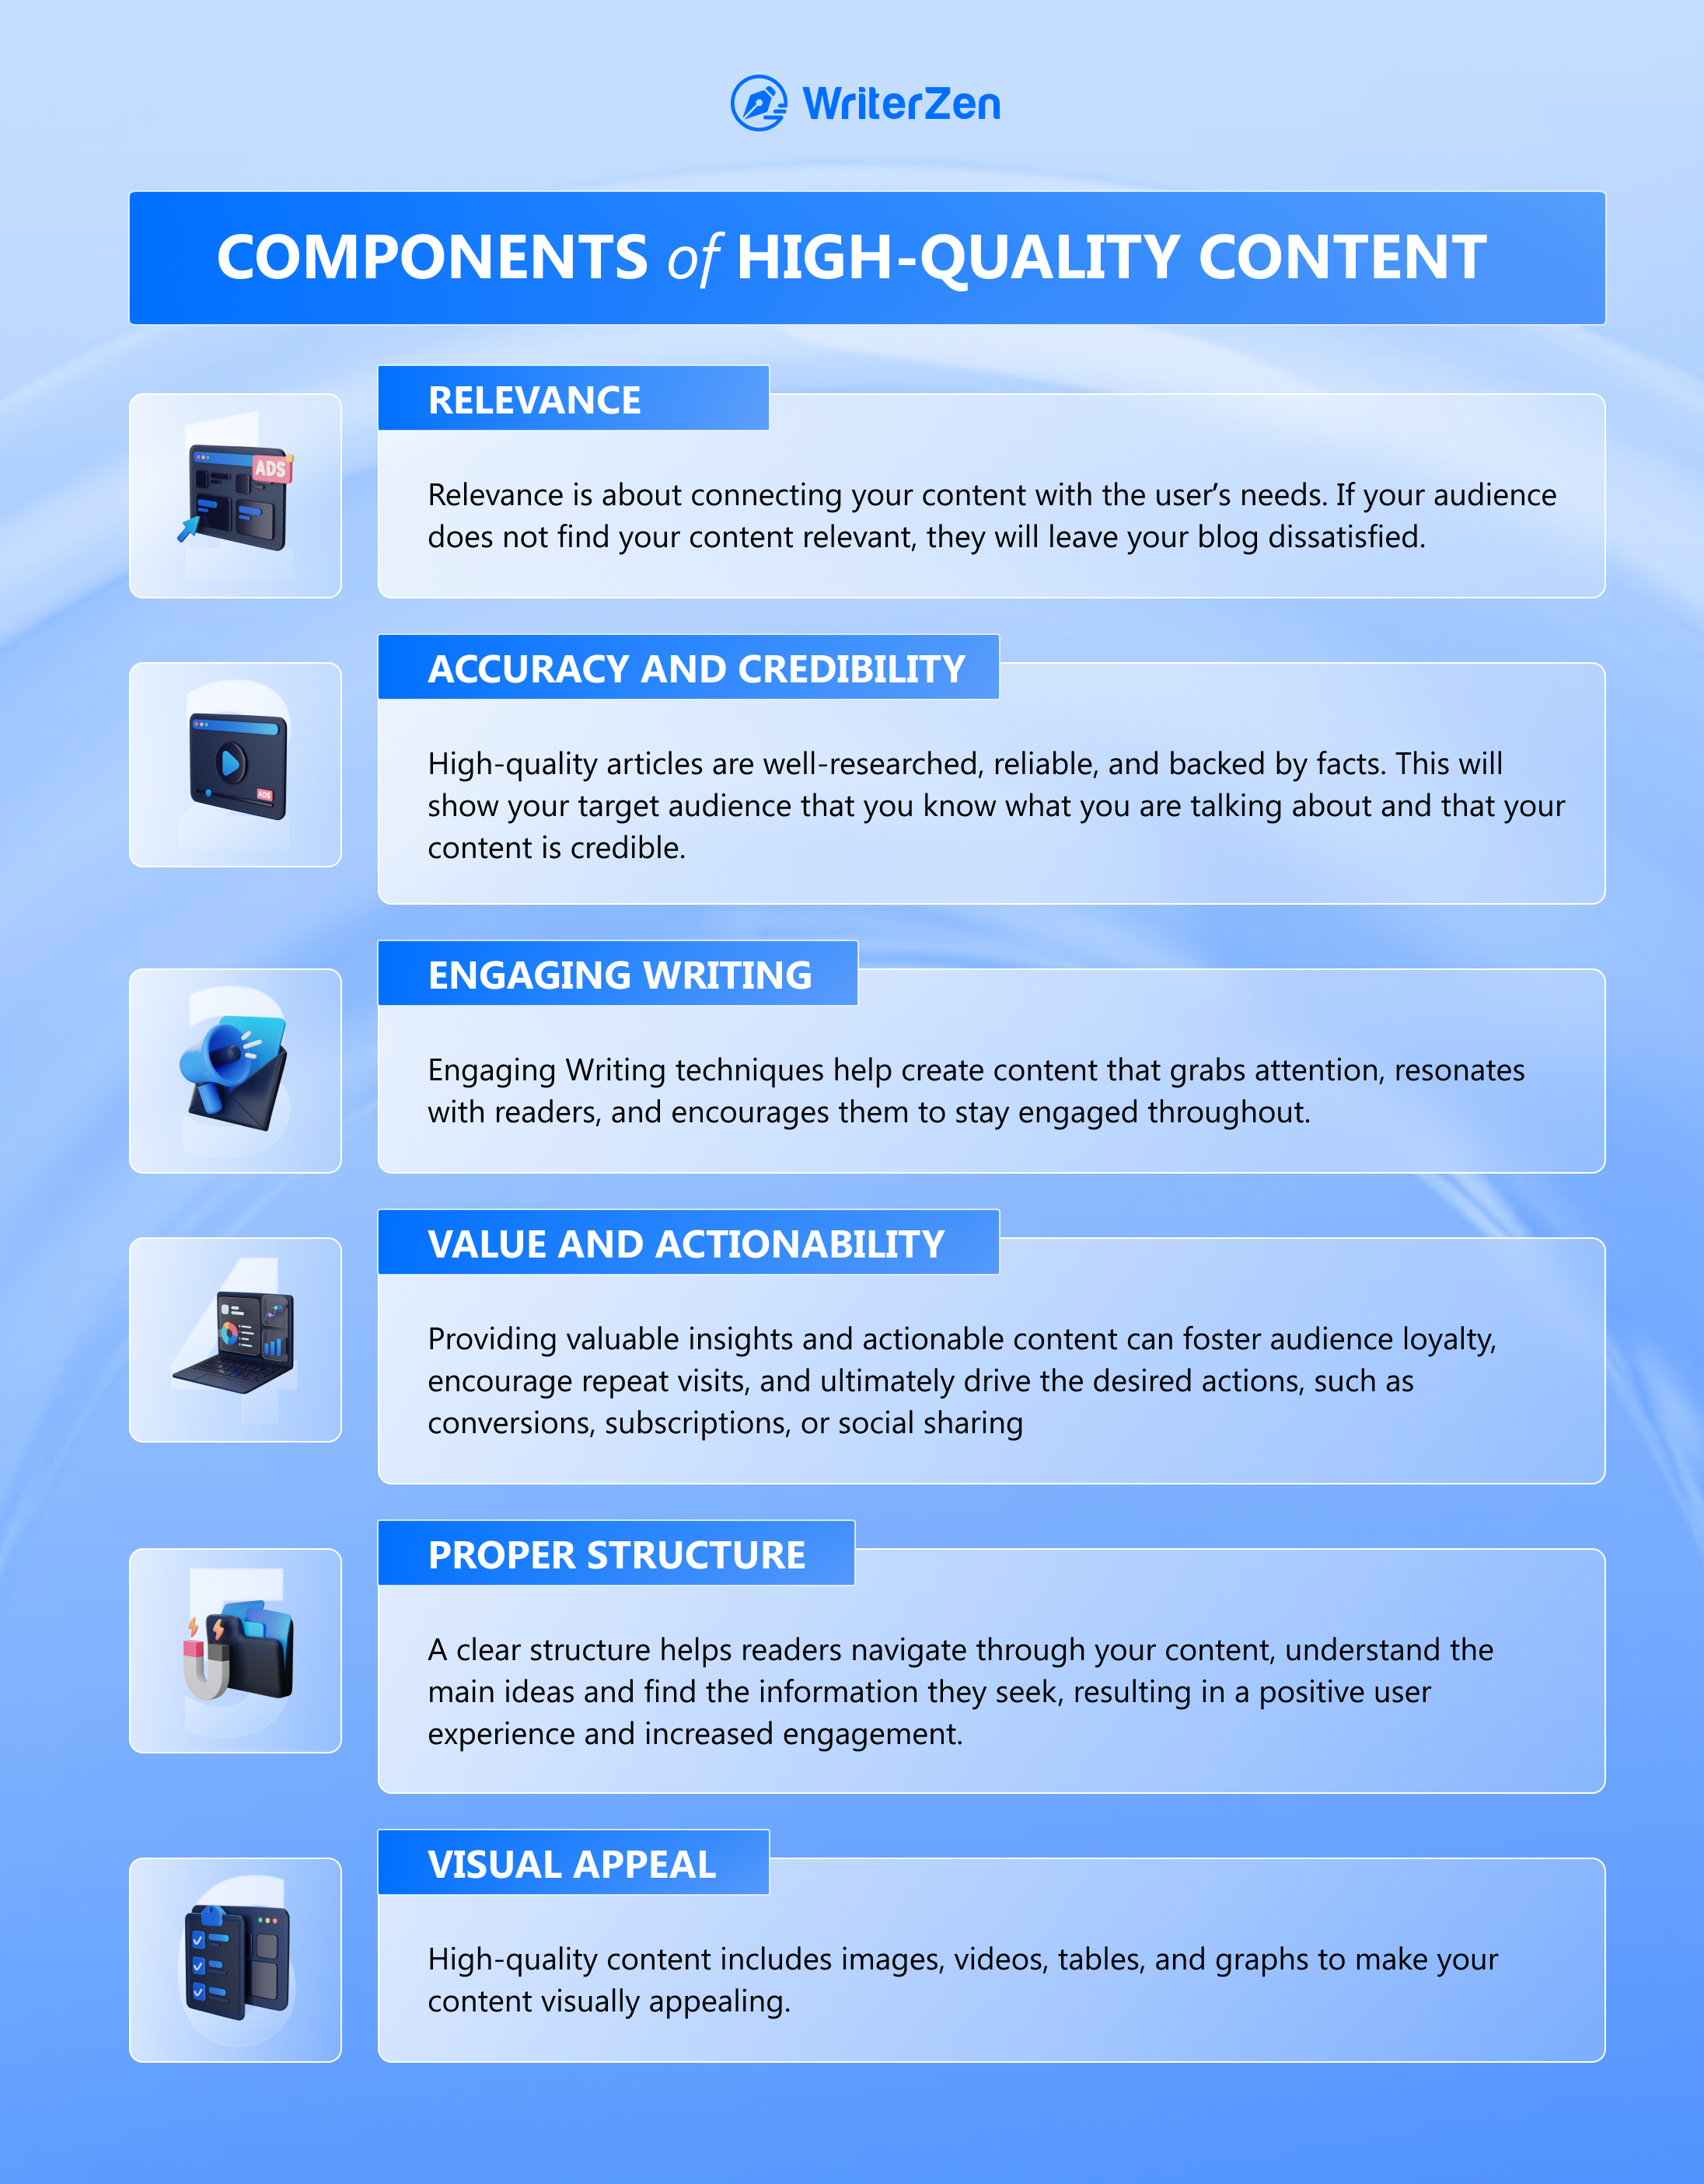 Components of High-quality Content